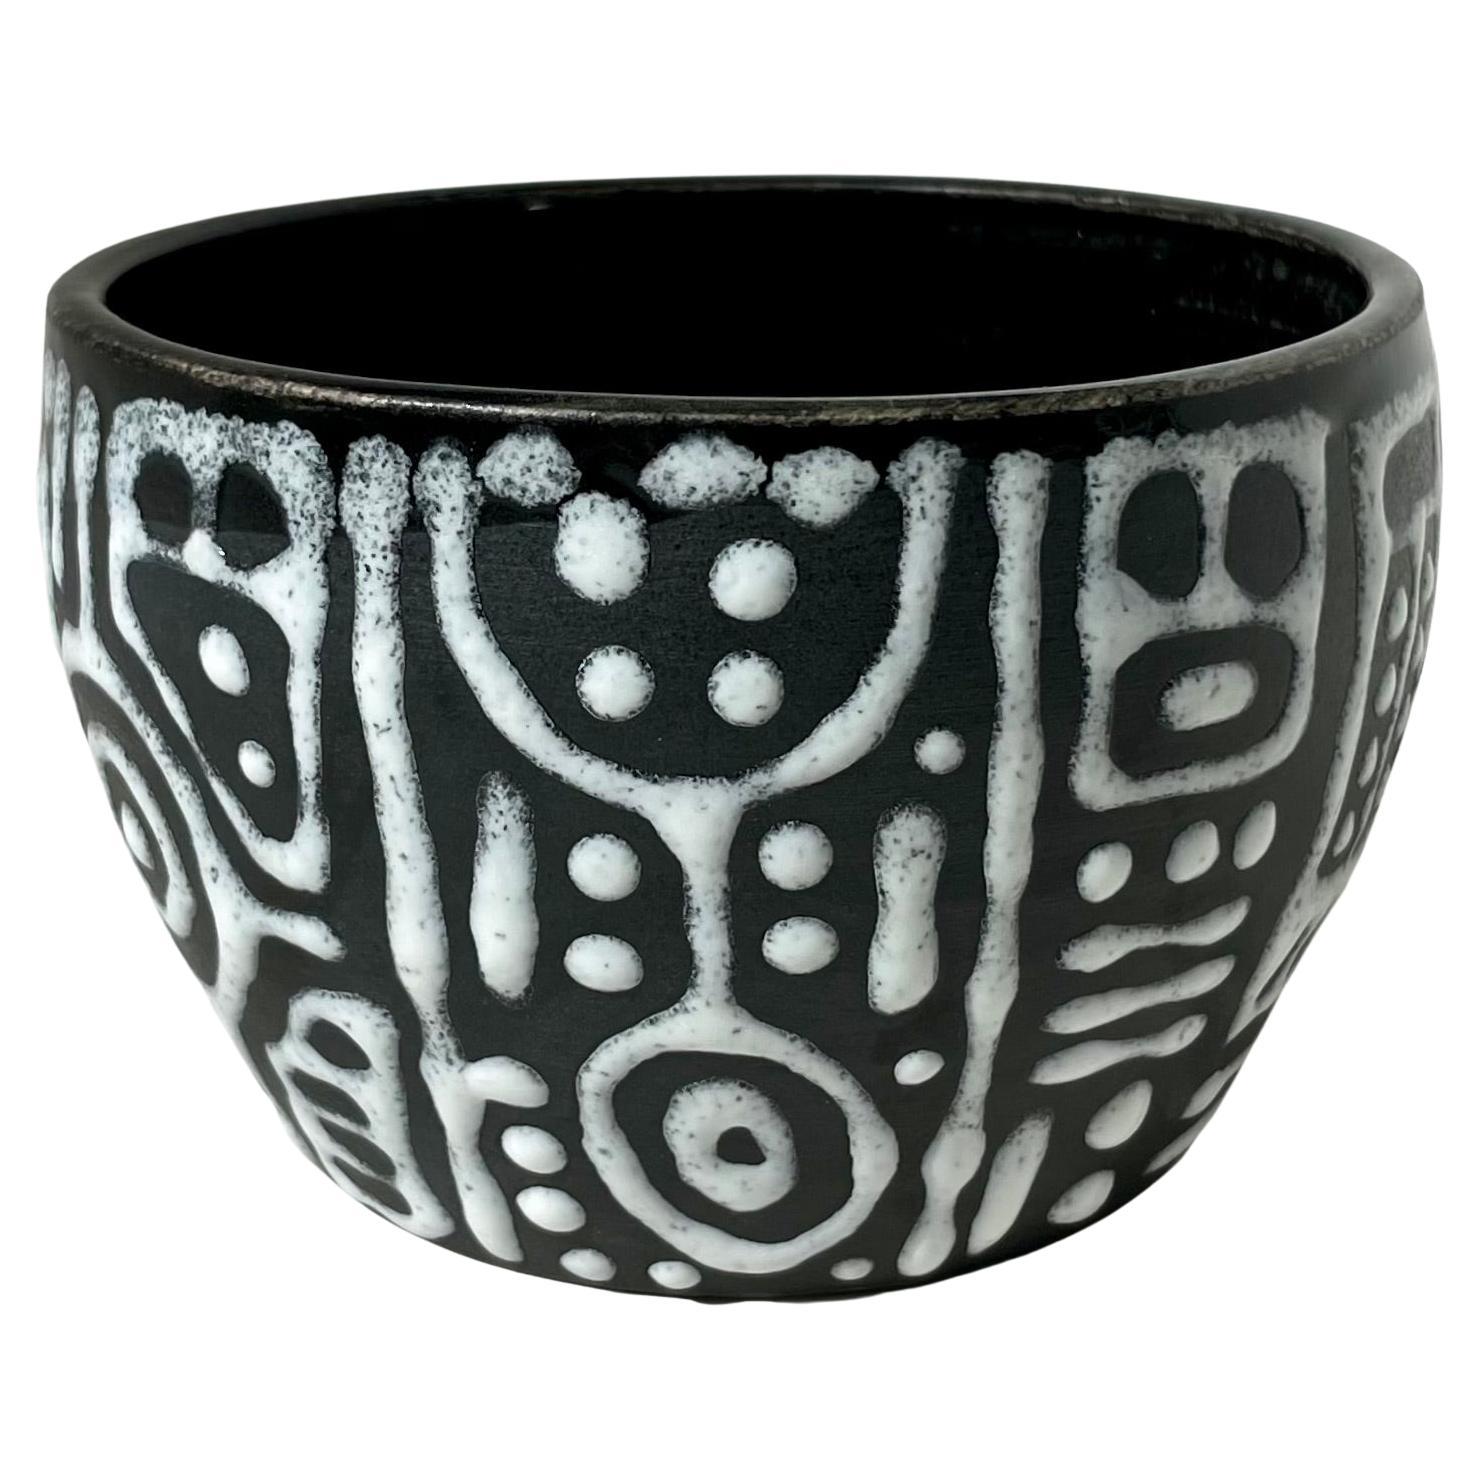 La Mola Tumbler, Handmade and Food Safe, by Artist Stef Duffy For Sale